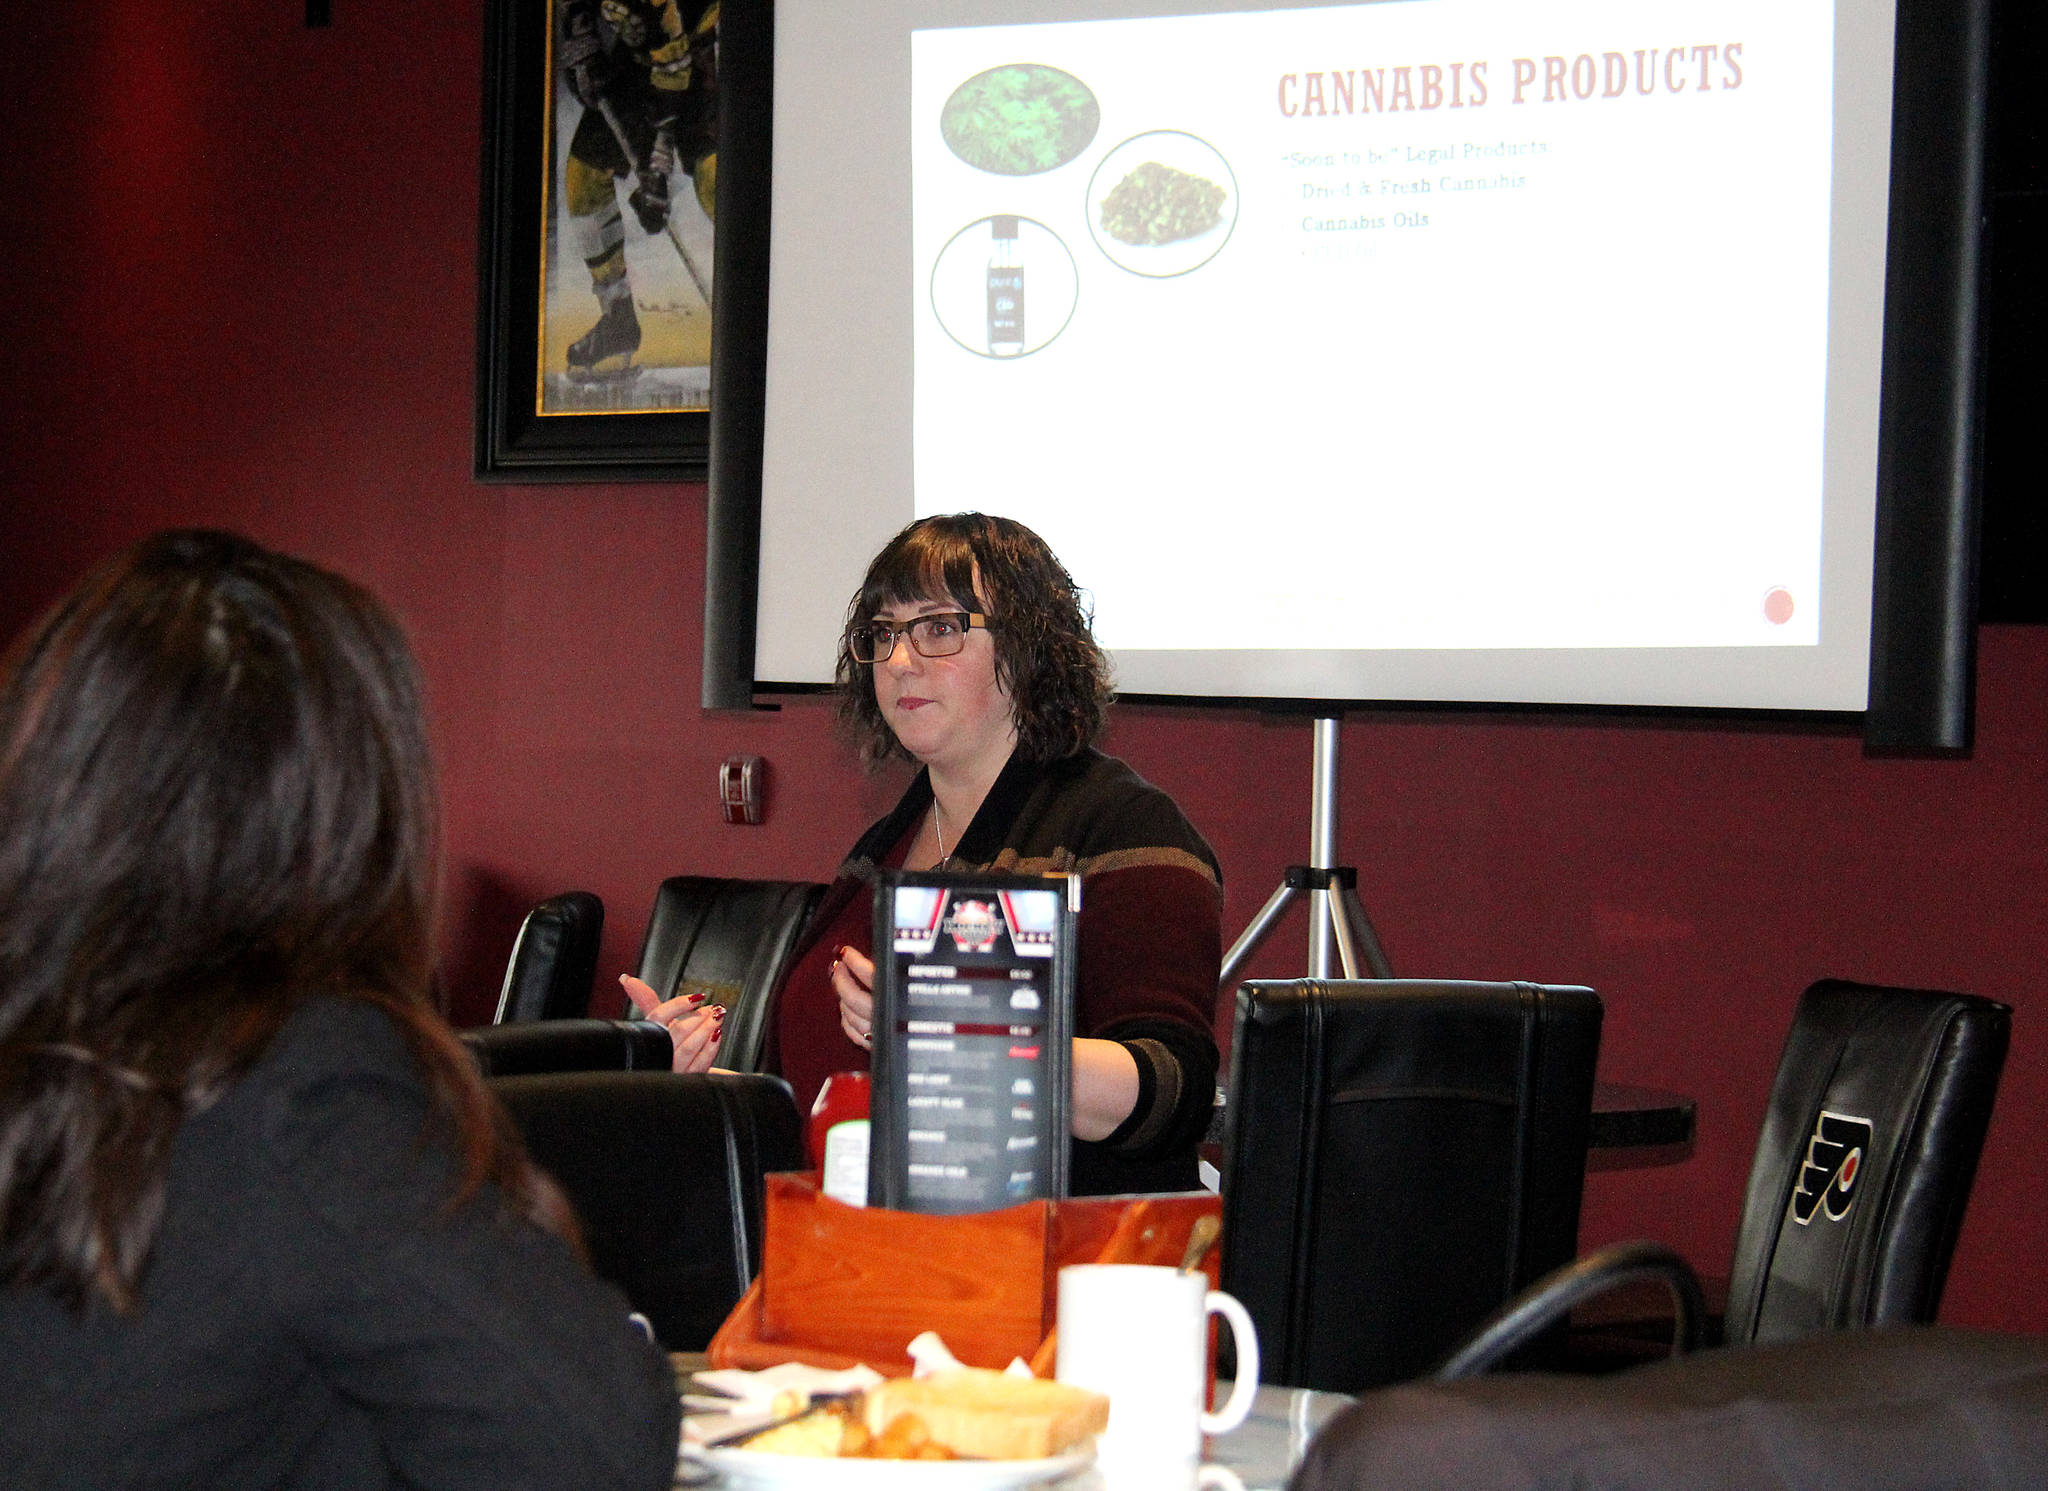 Chelsey Tannahil from Chandler Counsulting gives a presentation to business owners about the legalization of marijuana and what it means for the workplace, Oct. 10. Photo by Megan Roth/Sylvan Lake News